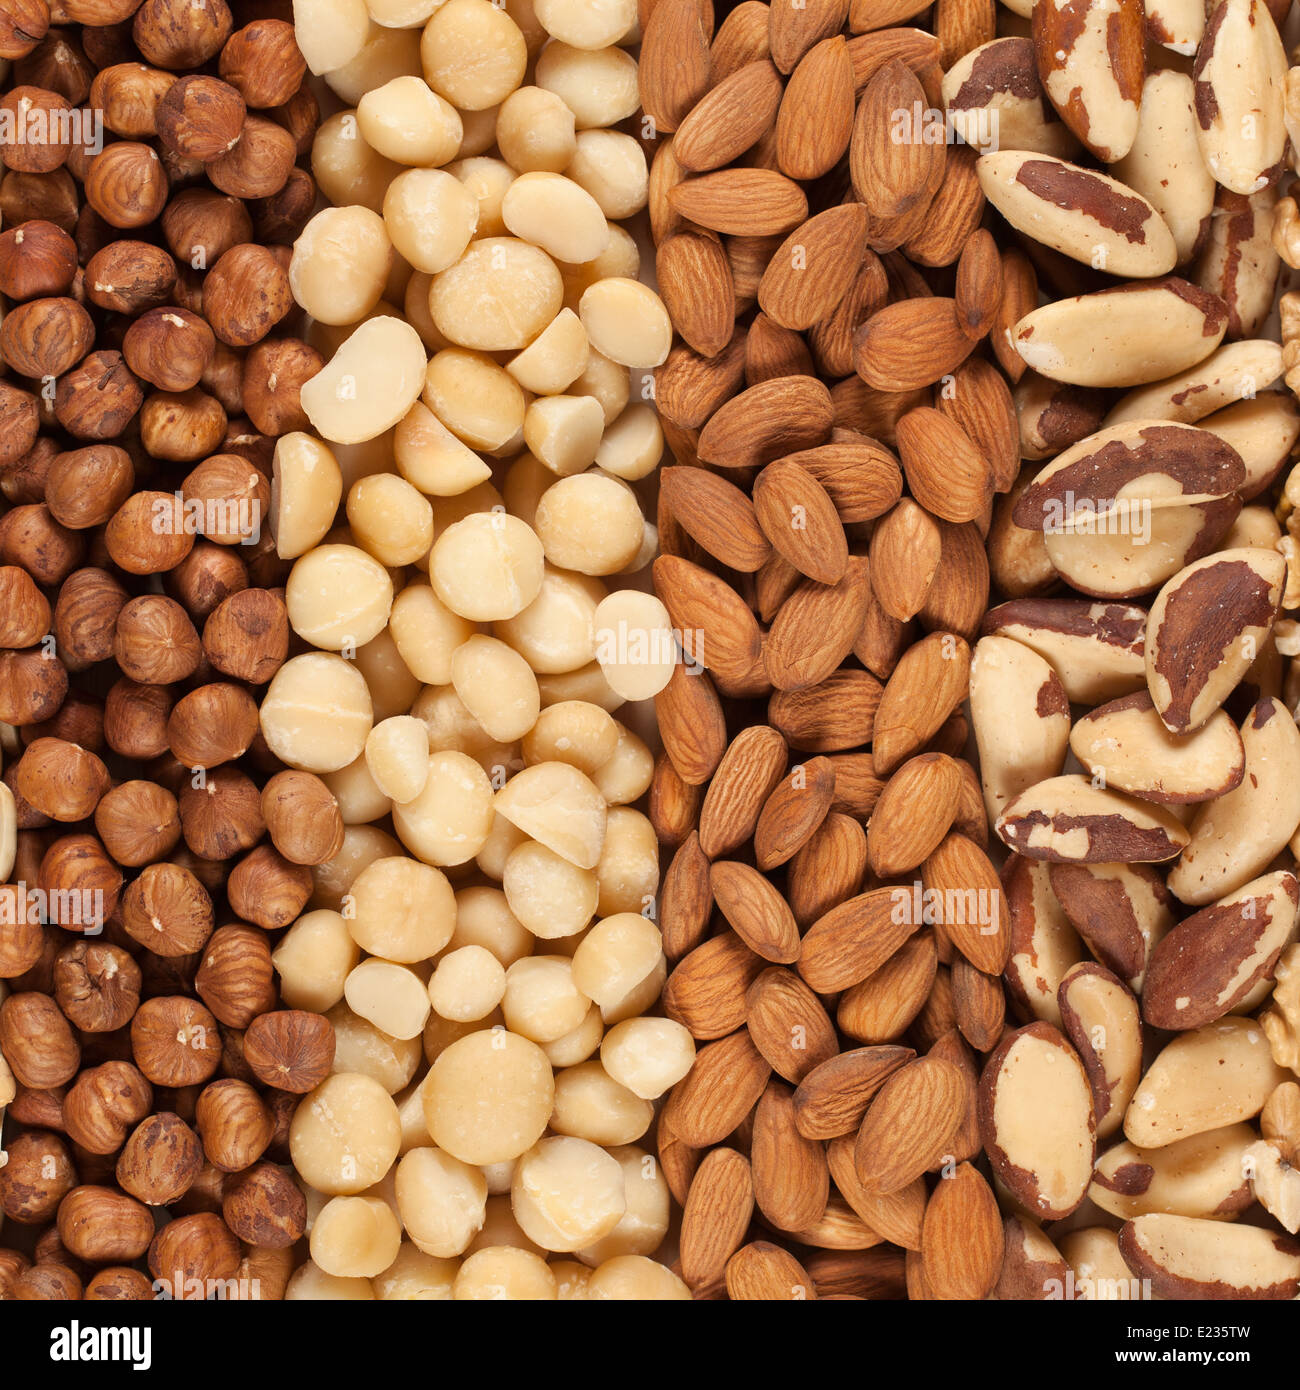 Collection of different nuts forming a background Stock Photo